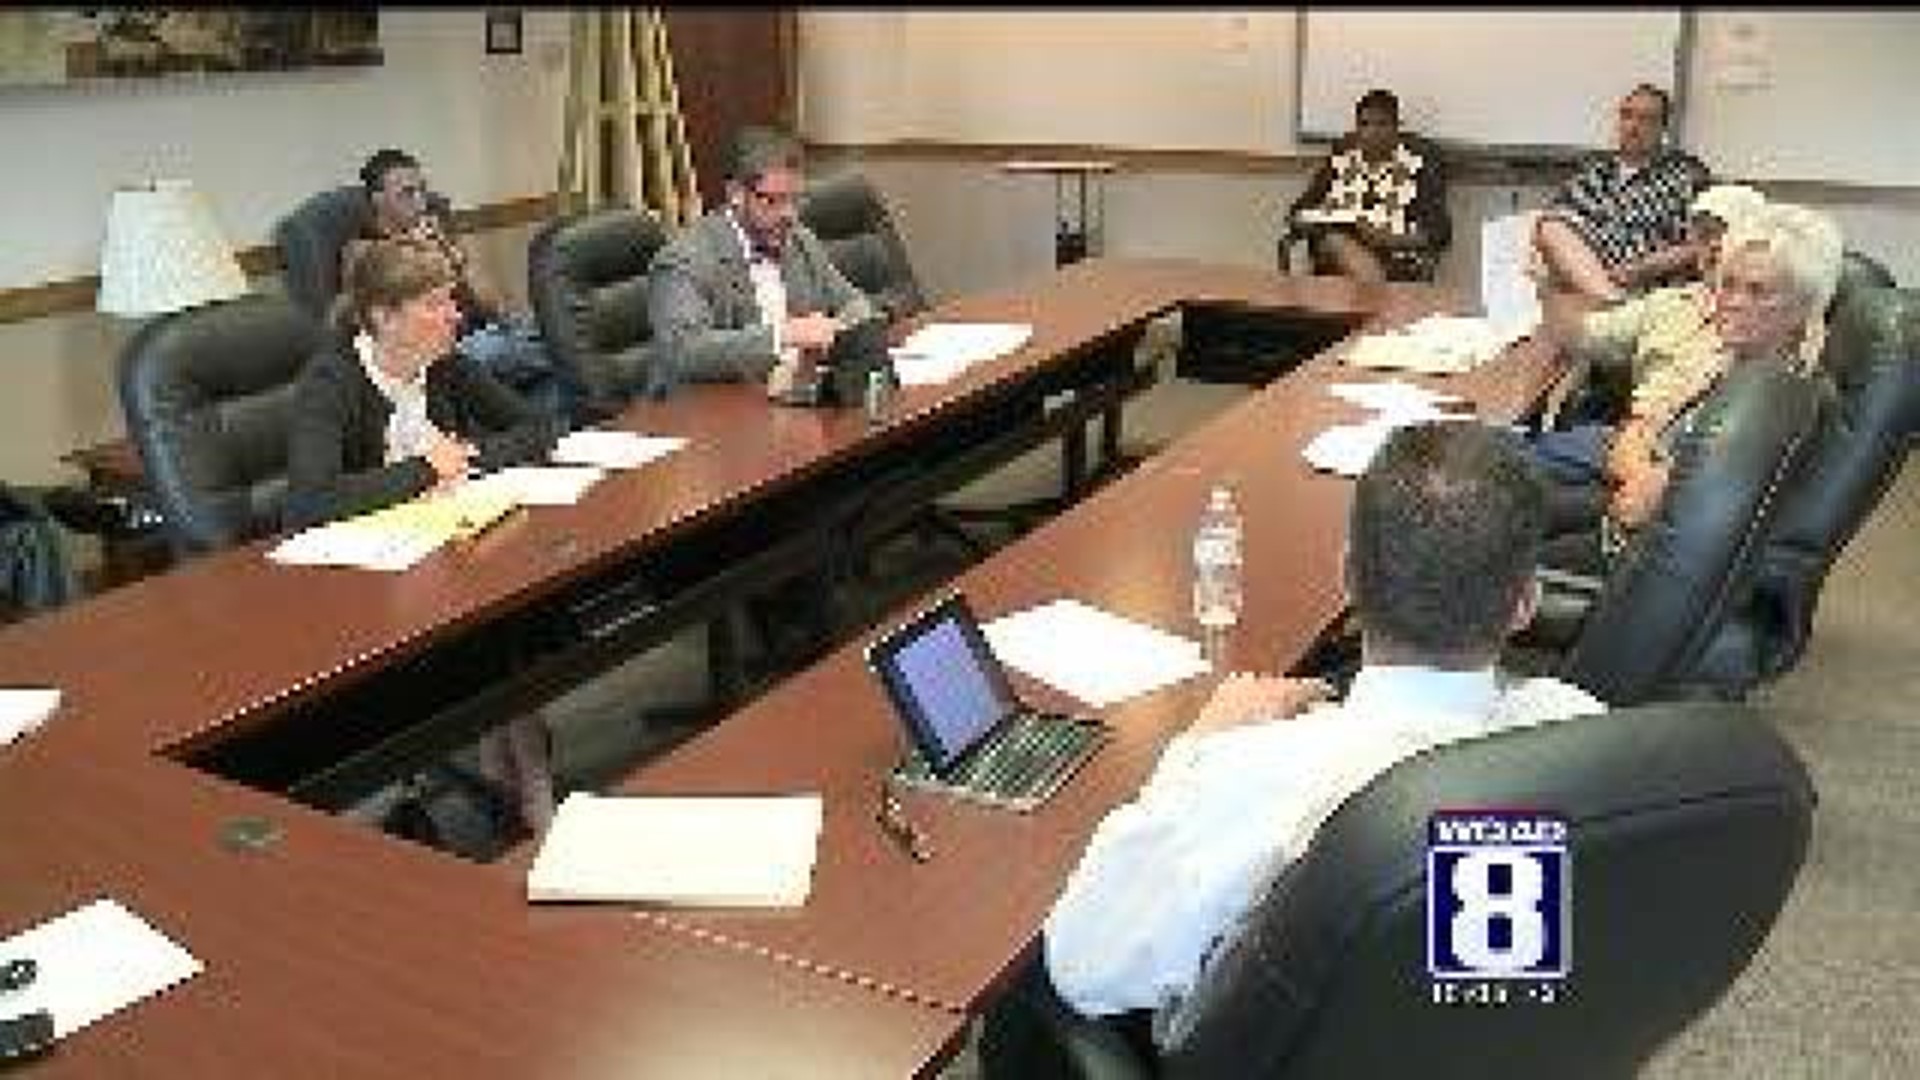 Animal Control Task Force meets in Galesburg